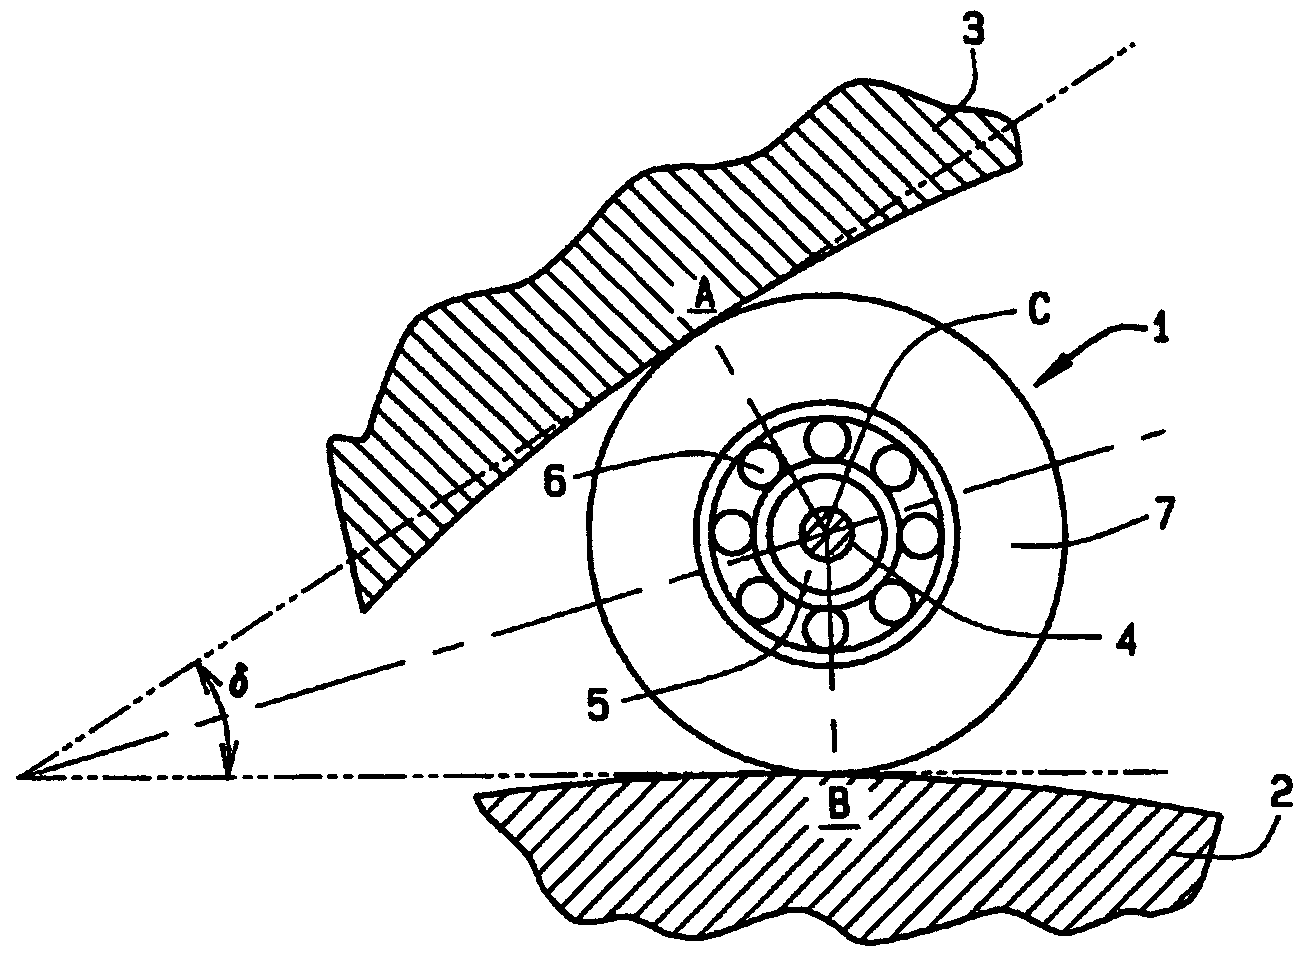 Wedge loading mechanism for traction drives